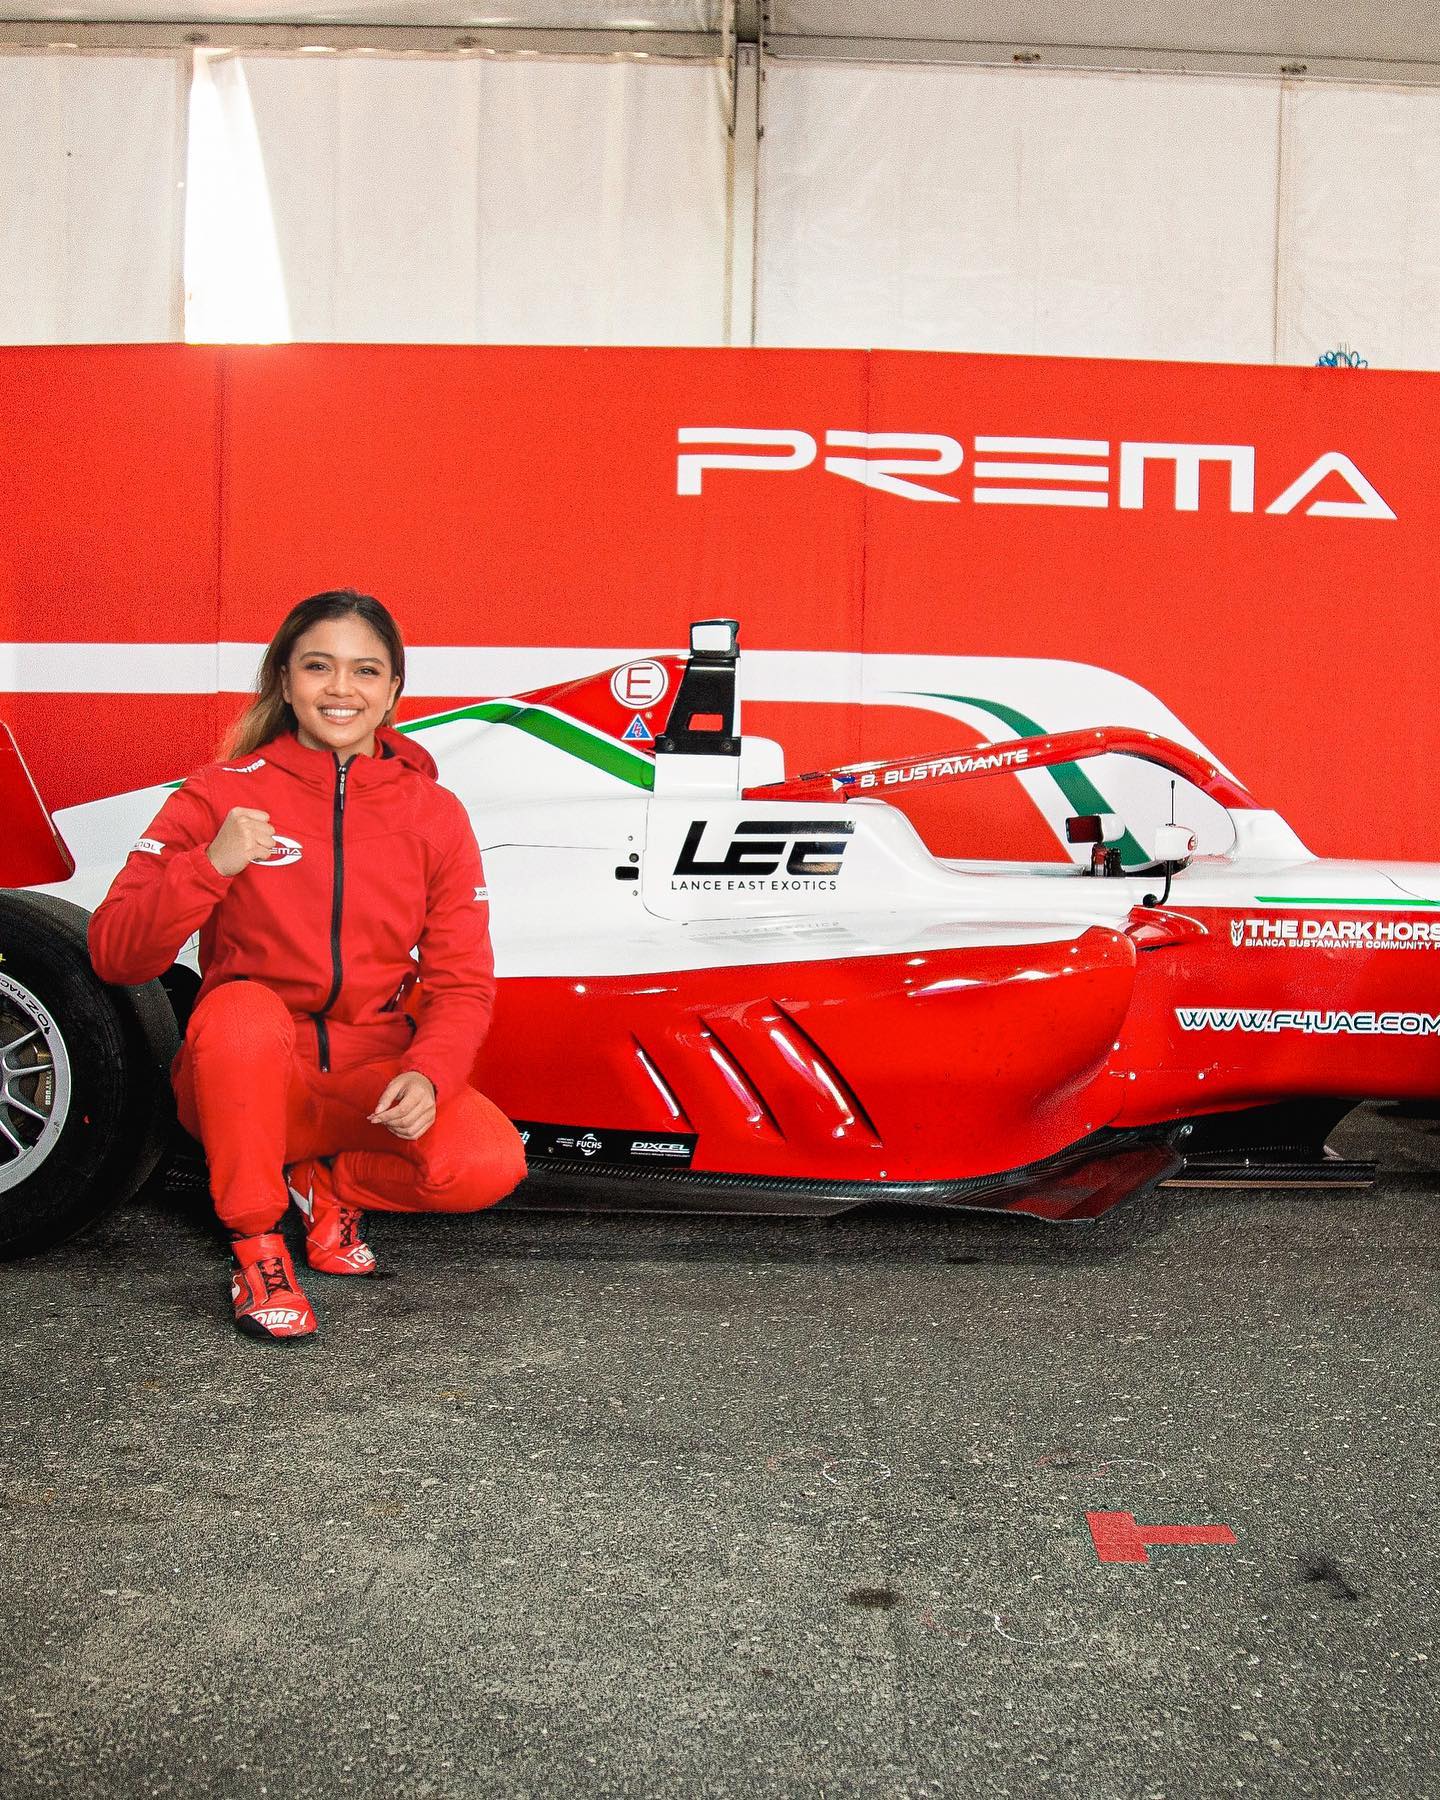 Bianca Bustamante finishes P2 podium - Bianca Bustamante ending the opening race strong